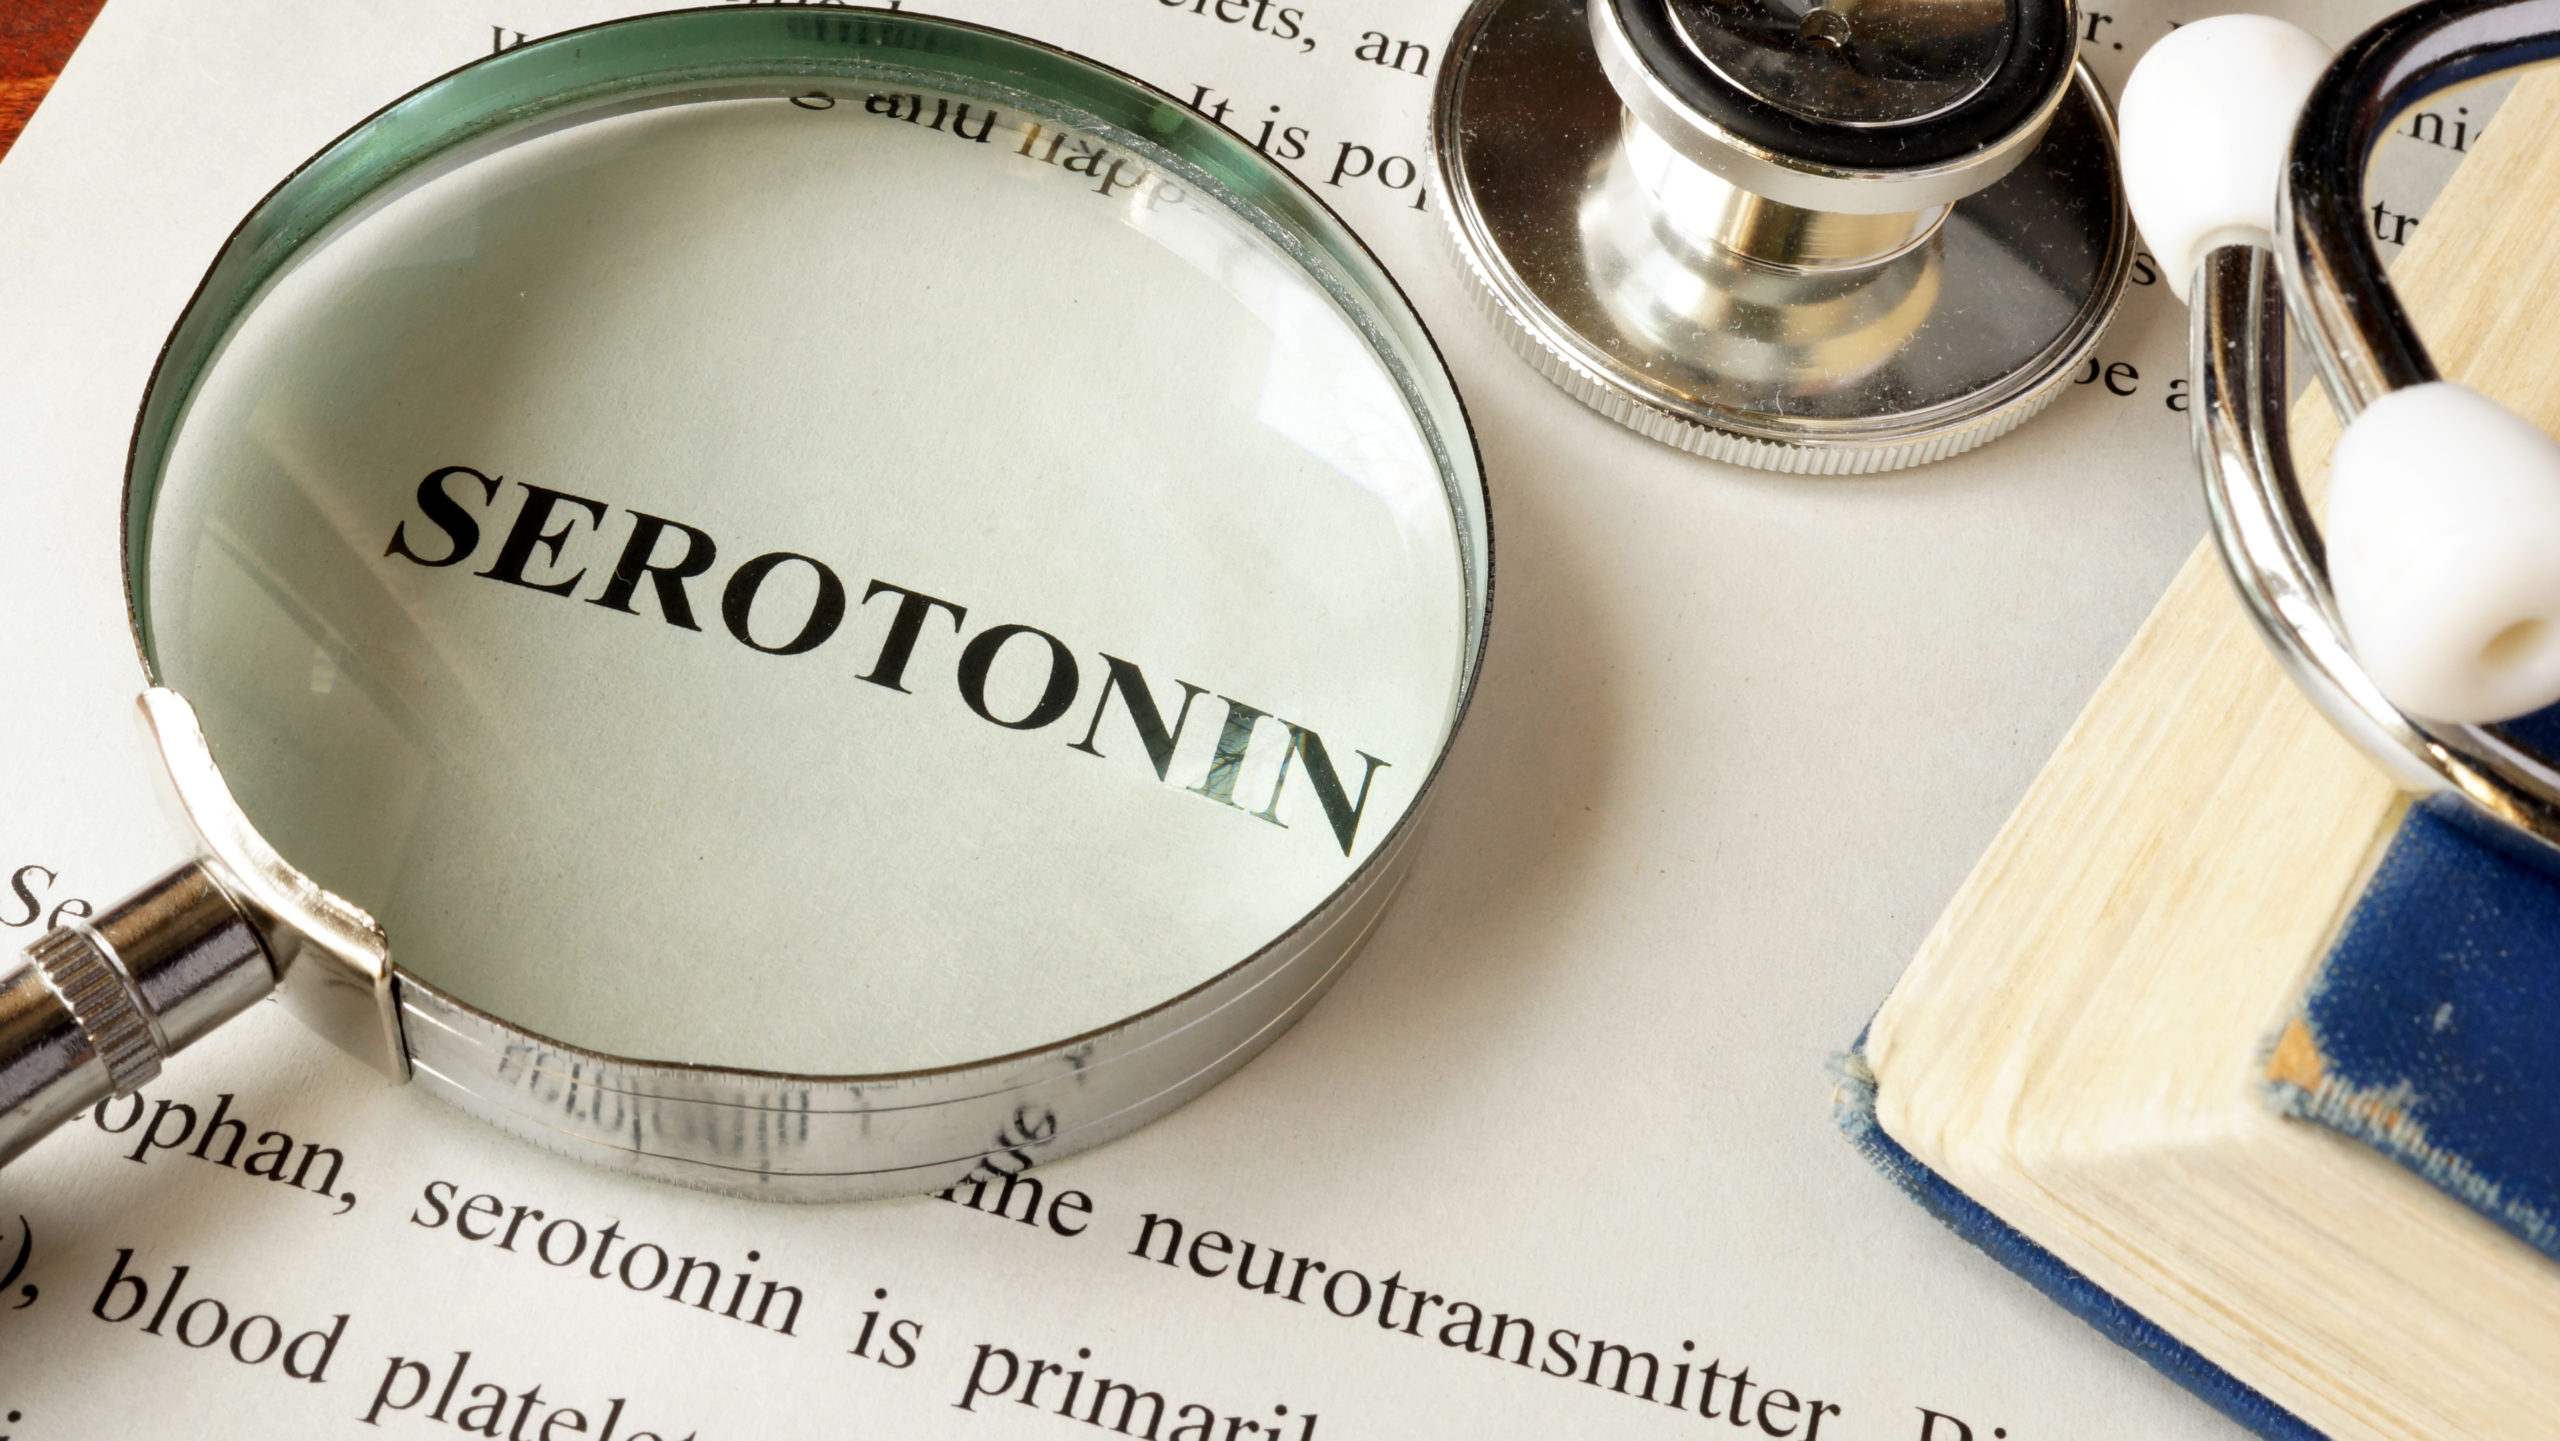 A magnifying glass positioned over a book with the word 'serotonin' highlighted, illustrating a focus on the study or understanding of serotonin.